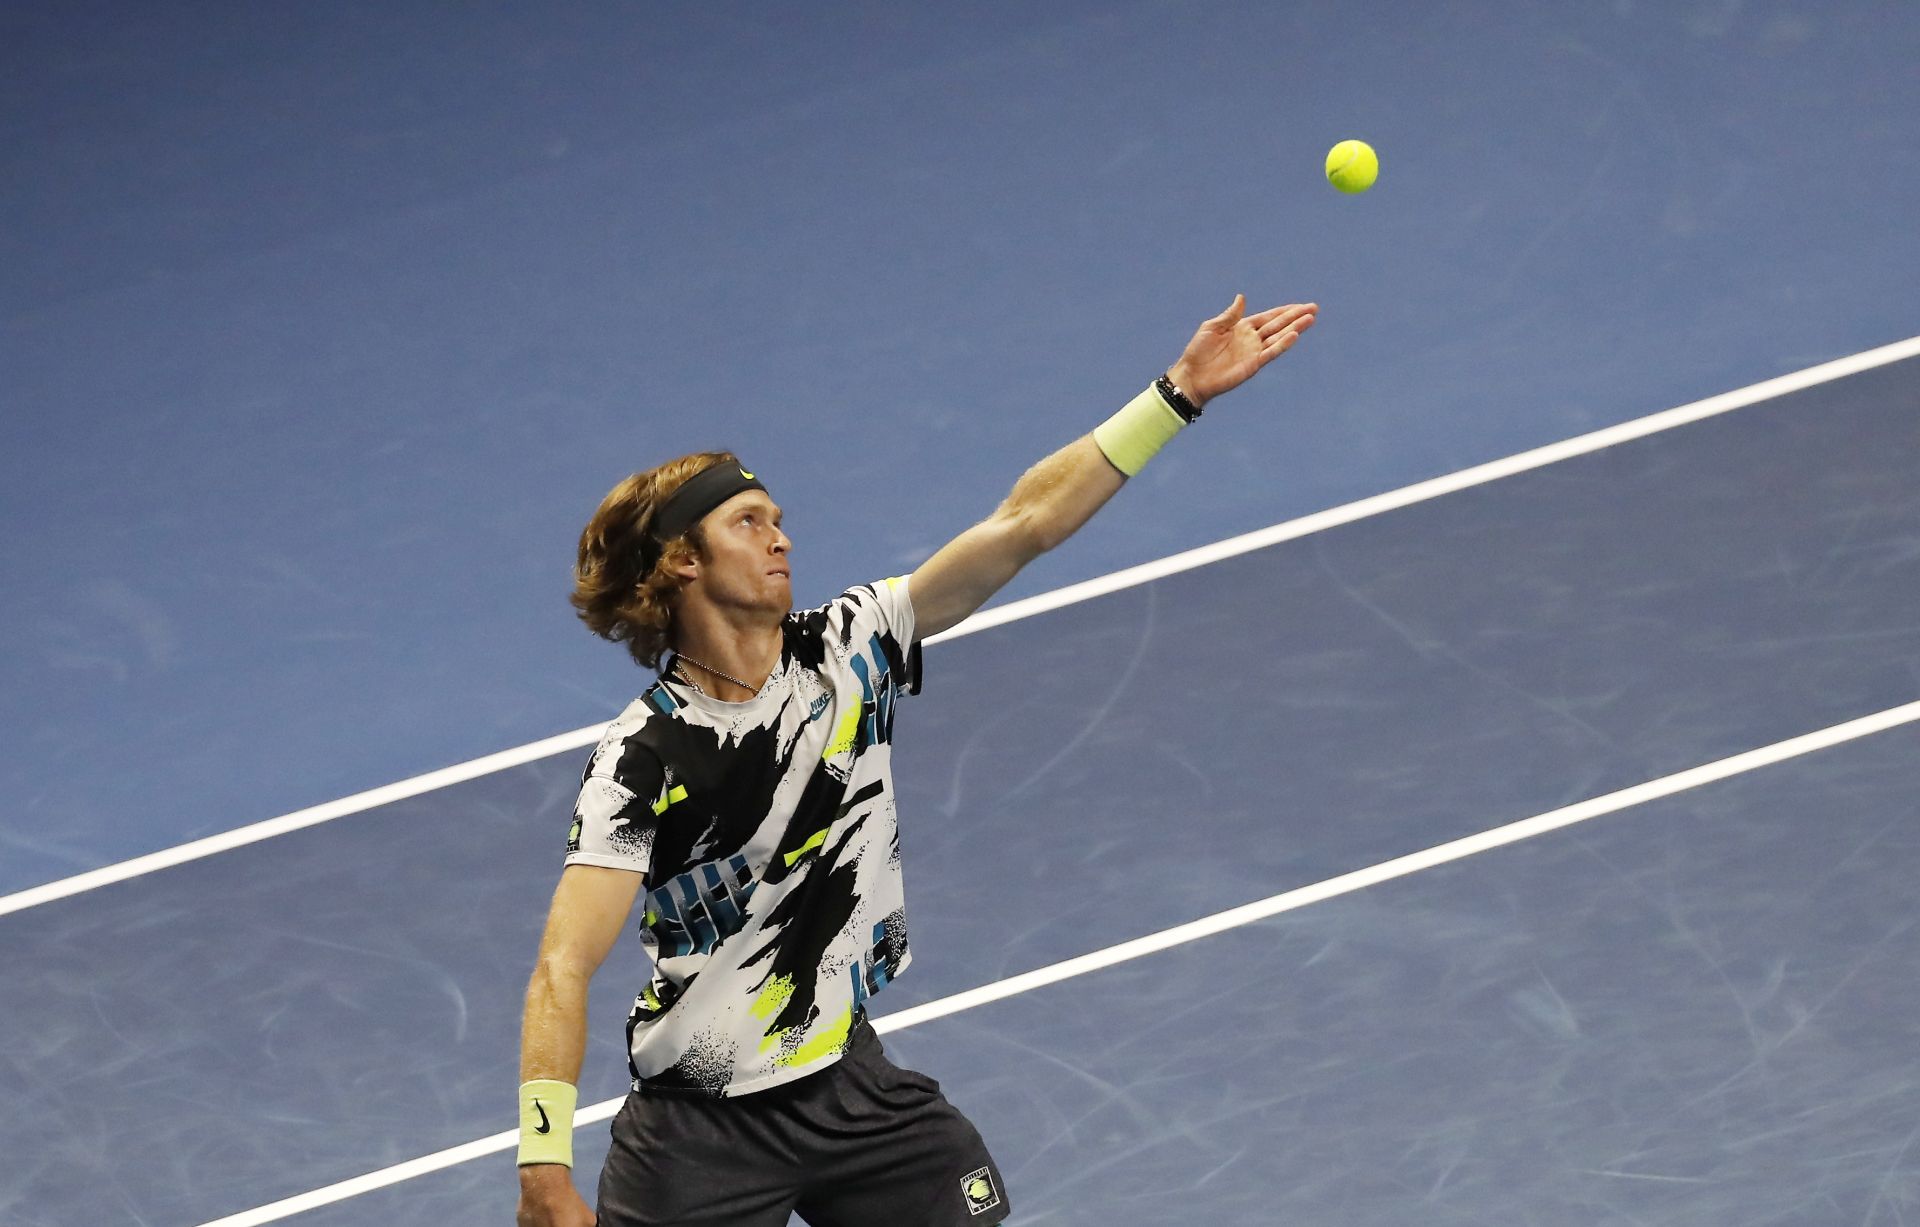 epa08752507 Andrey Rublev of Russia in action during his semi final match against Denis Shapovalov of Canada at the St.Petersburg Open ATP tennis tournament in St.Petersburg, Russia, 17 October 2020.  EPA/ANATOLY MALTSEV